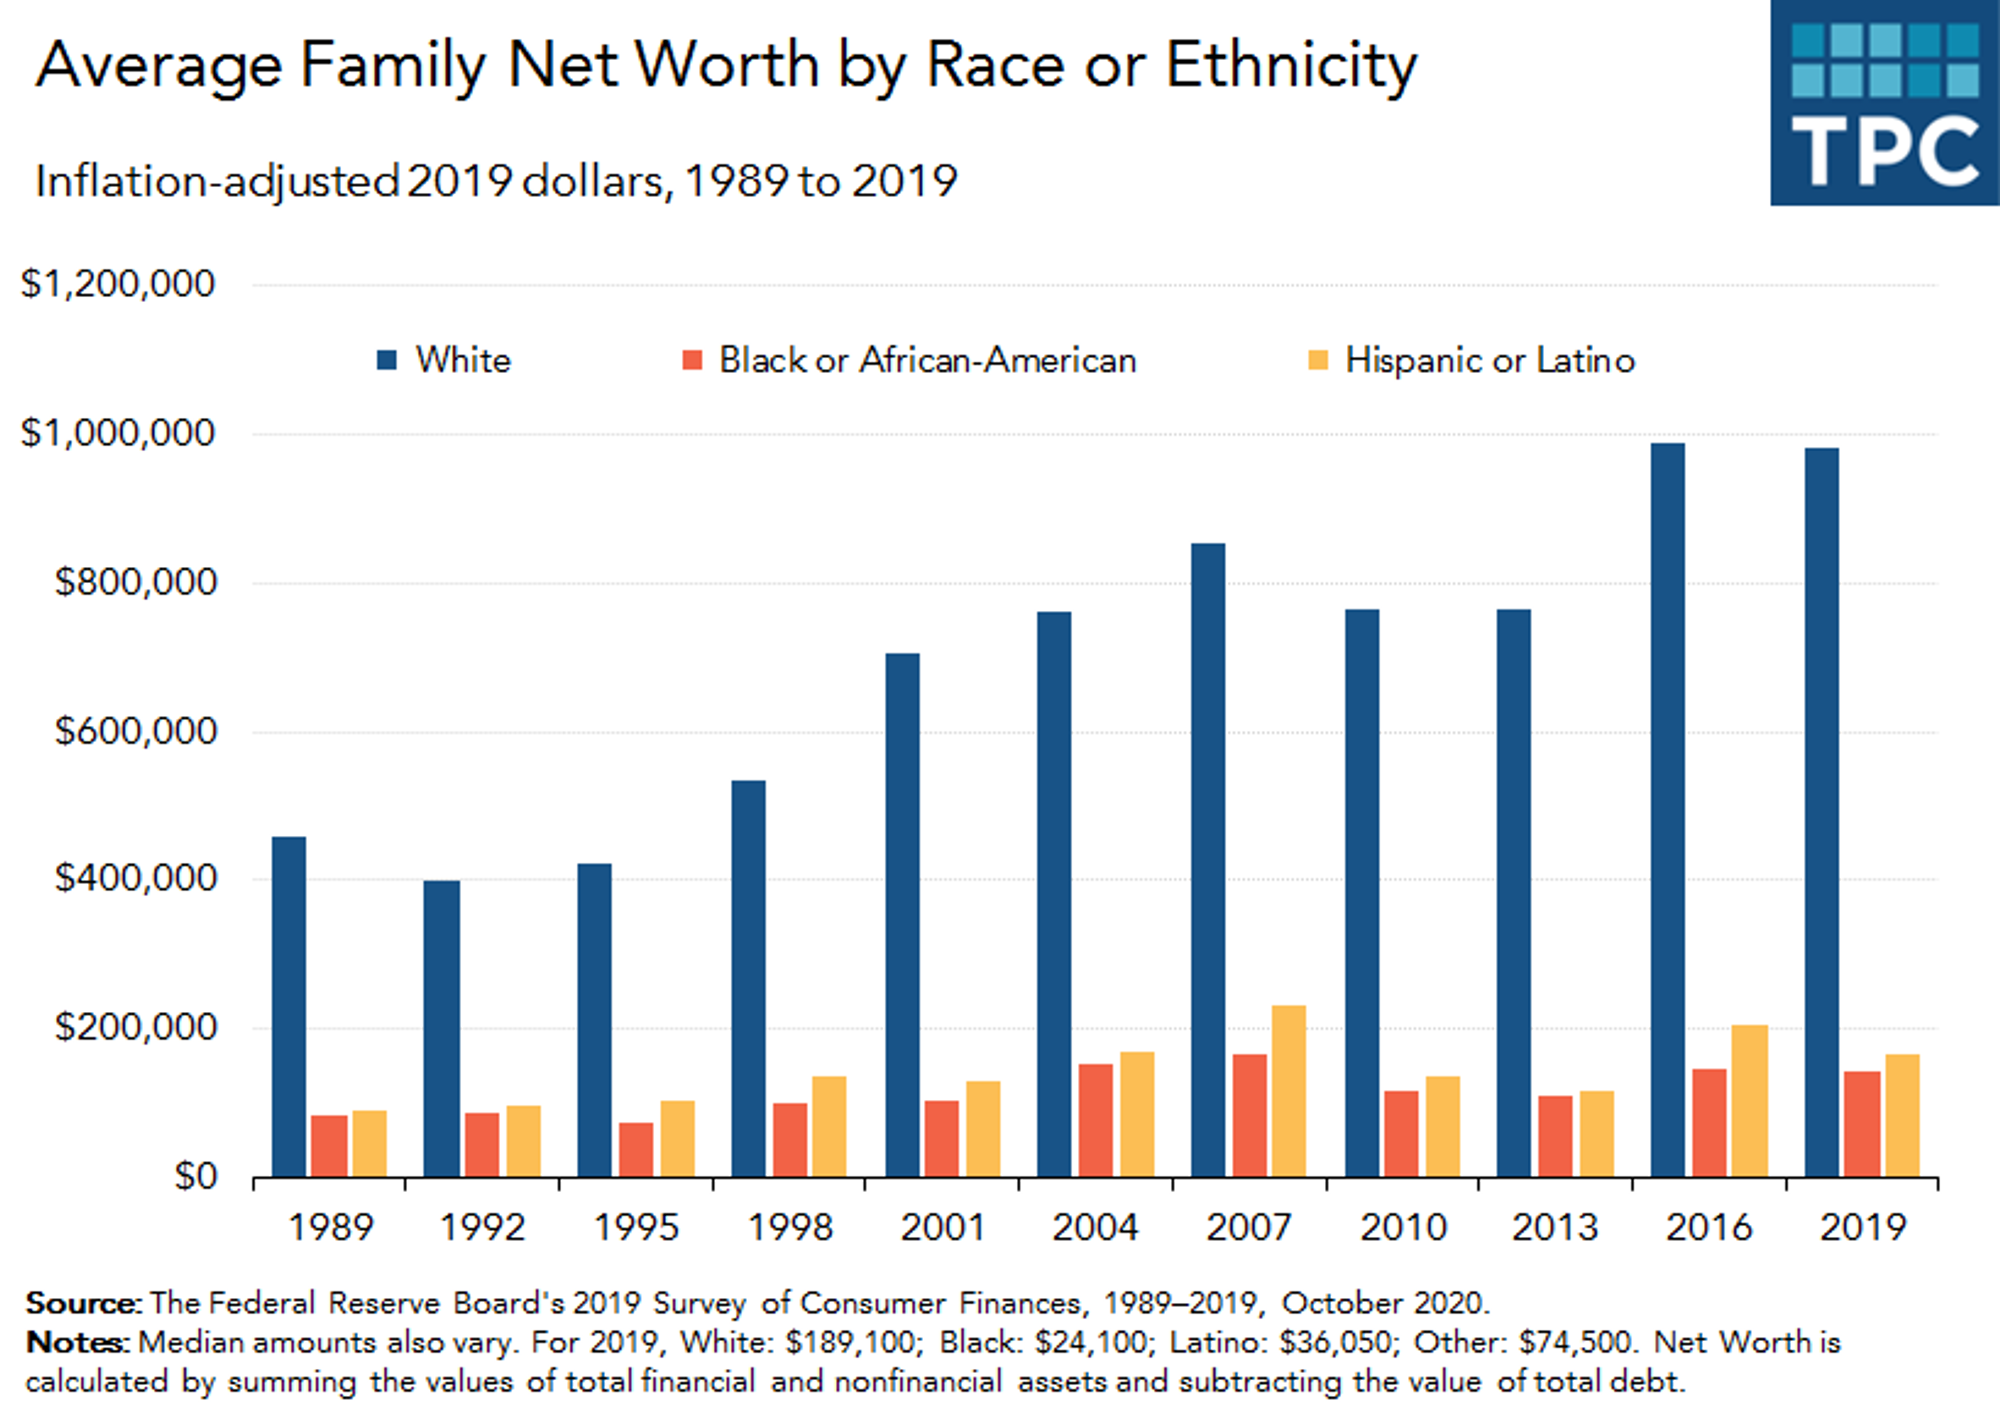 https://www.taxpolicycenter.org/taxvox/new-look-racial-wealth-inequalities-pandemic